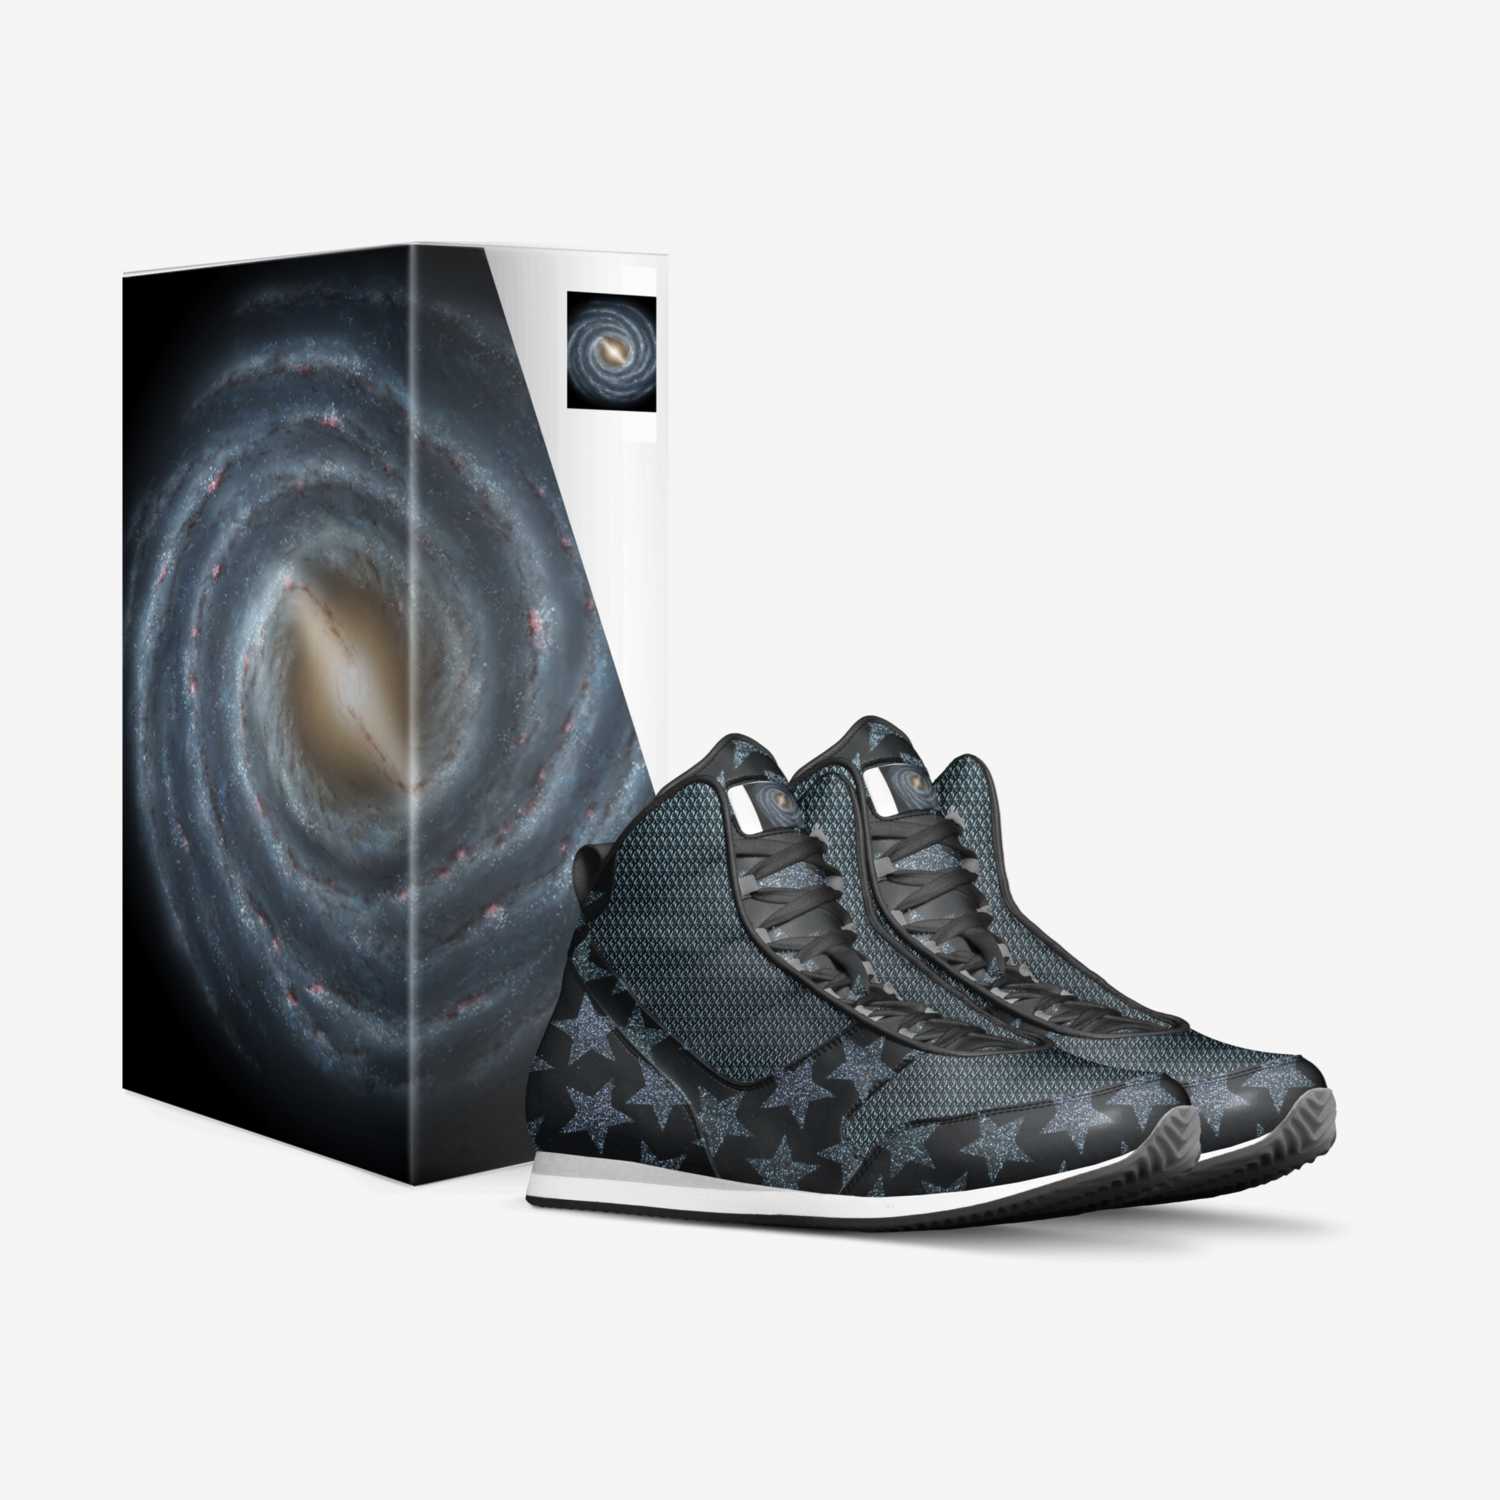 Galaxy ones | A Custom Shoe concept by Carter Stone